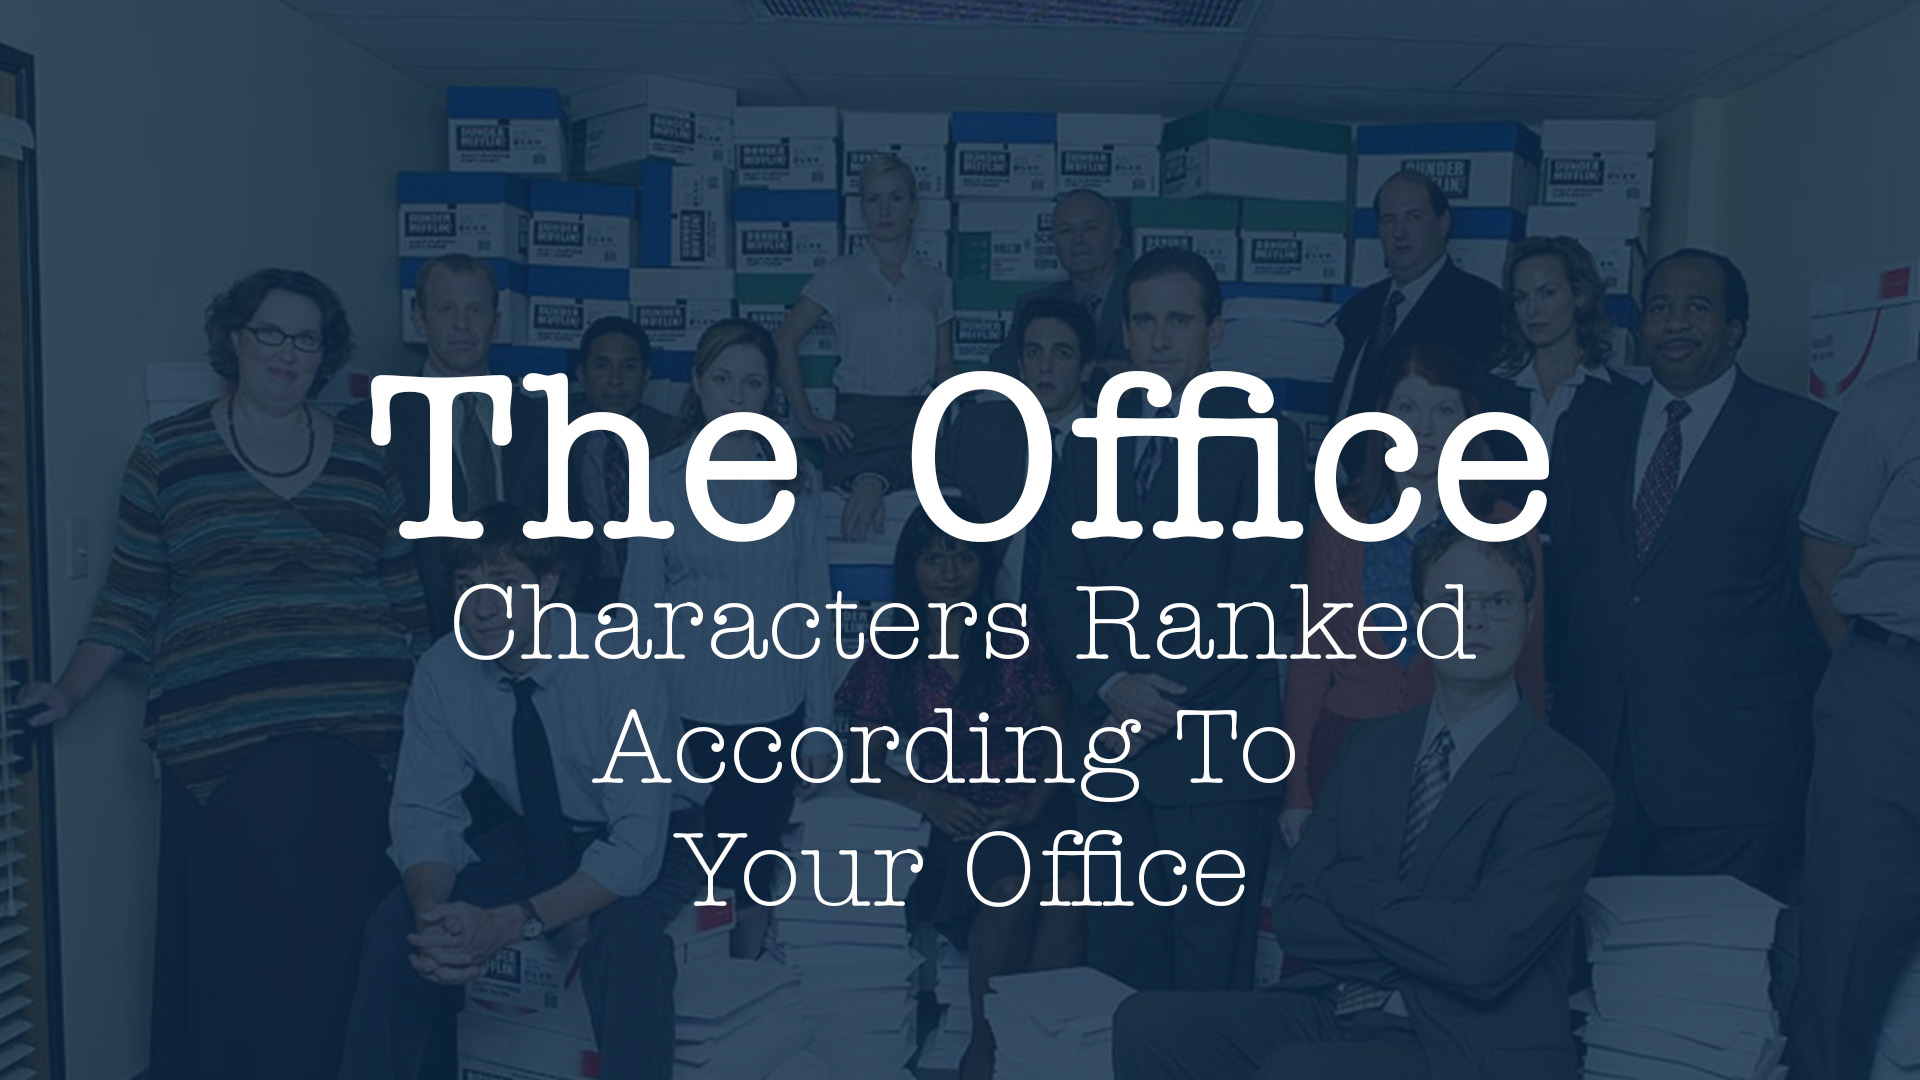 Ranking The Office Characters According to Your Office